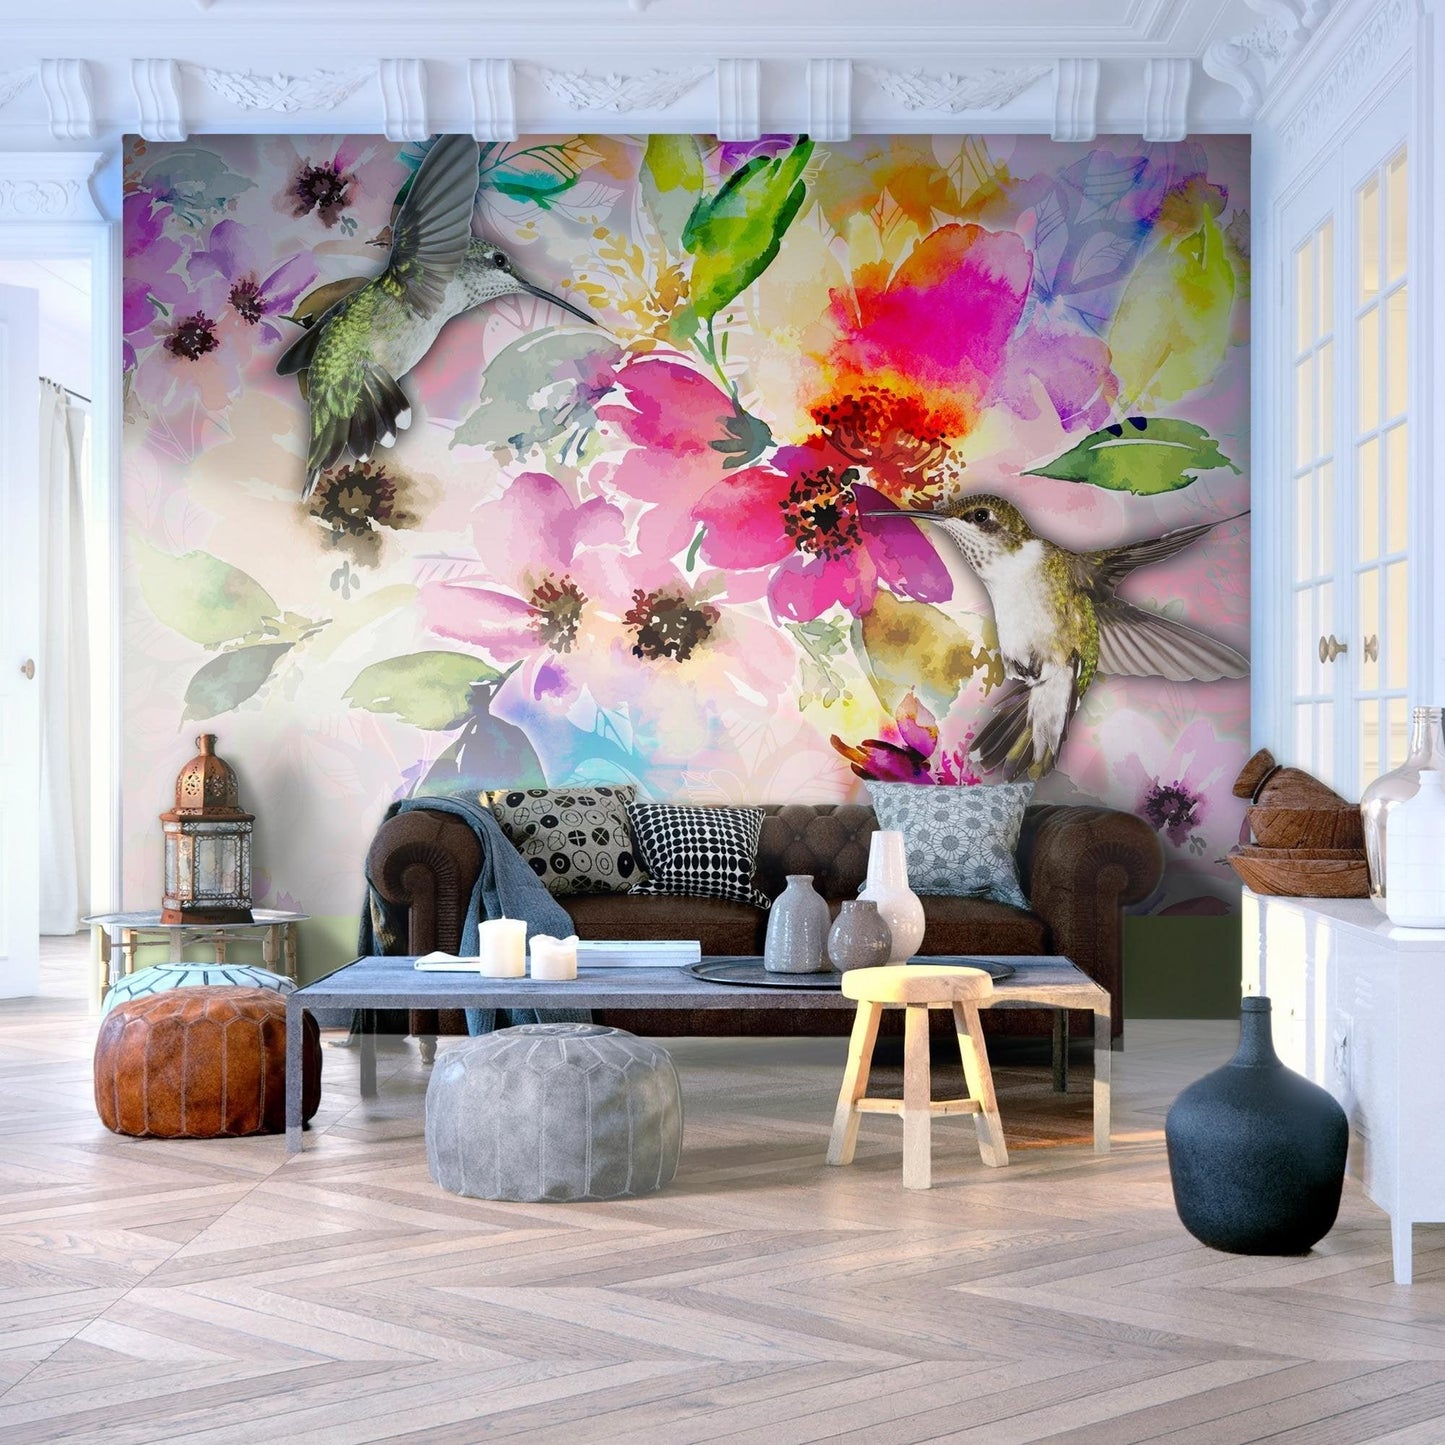 Peel and stick wall mural - Colours of Nature - www.trendingbestsellers.com